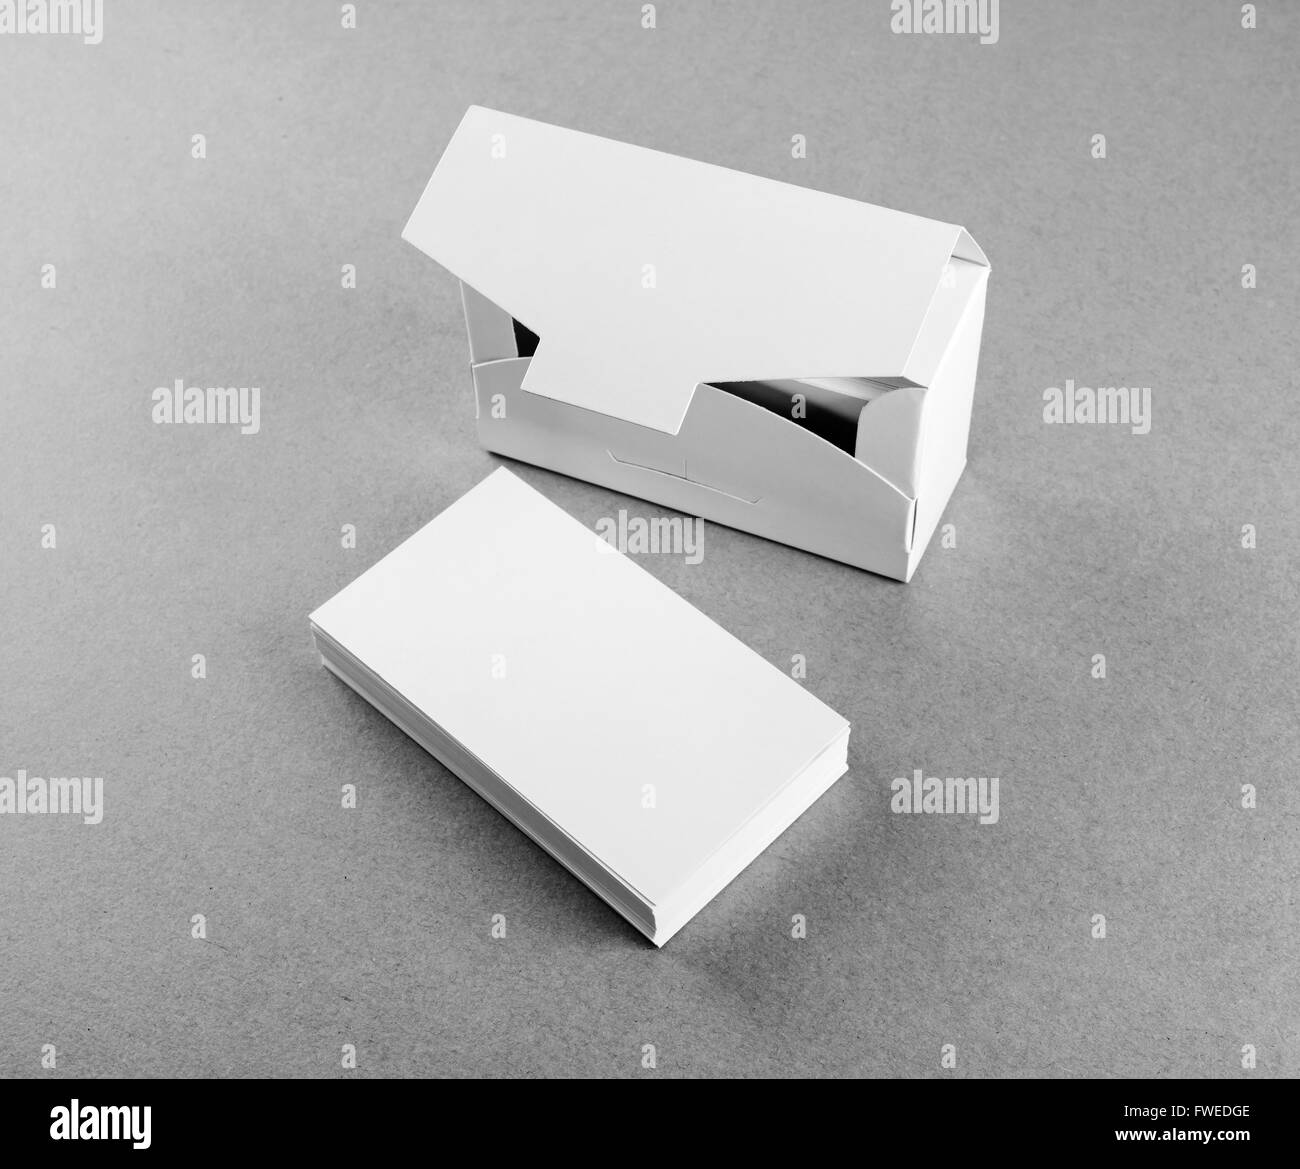 Blank business cards and a box for them on the table. Mock-up for branding identity. Black and white image. Stock Photo